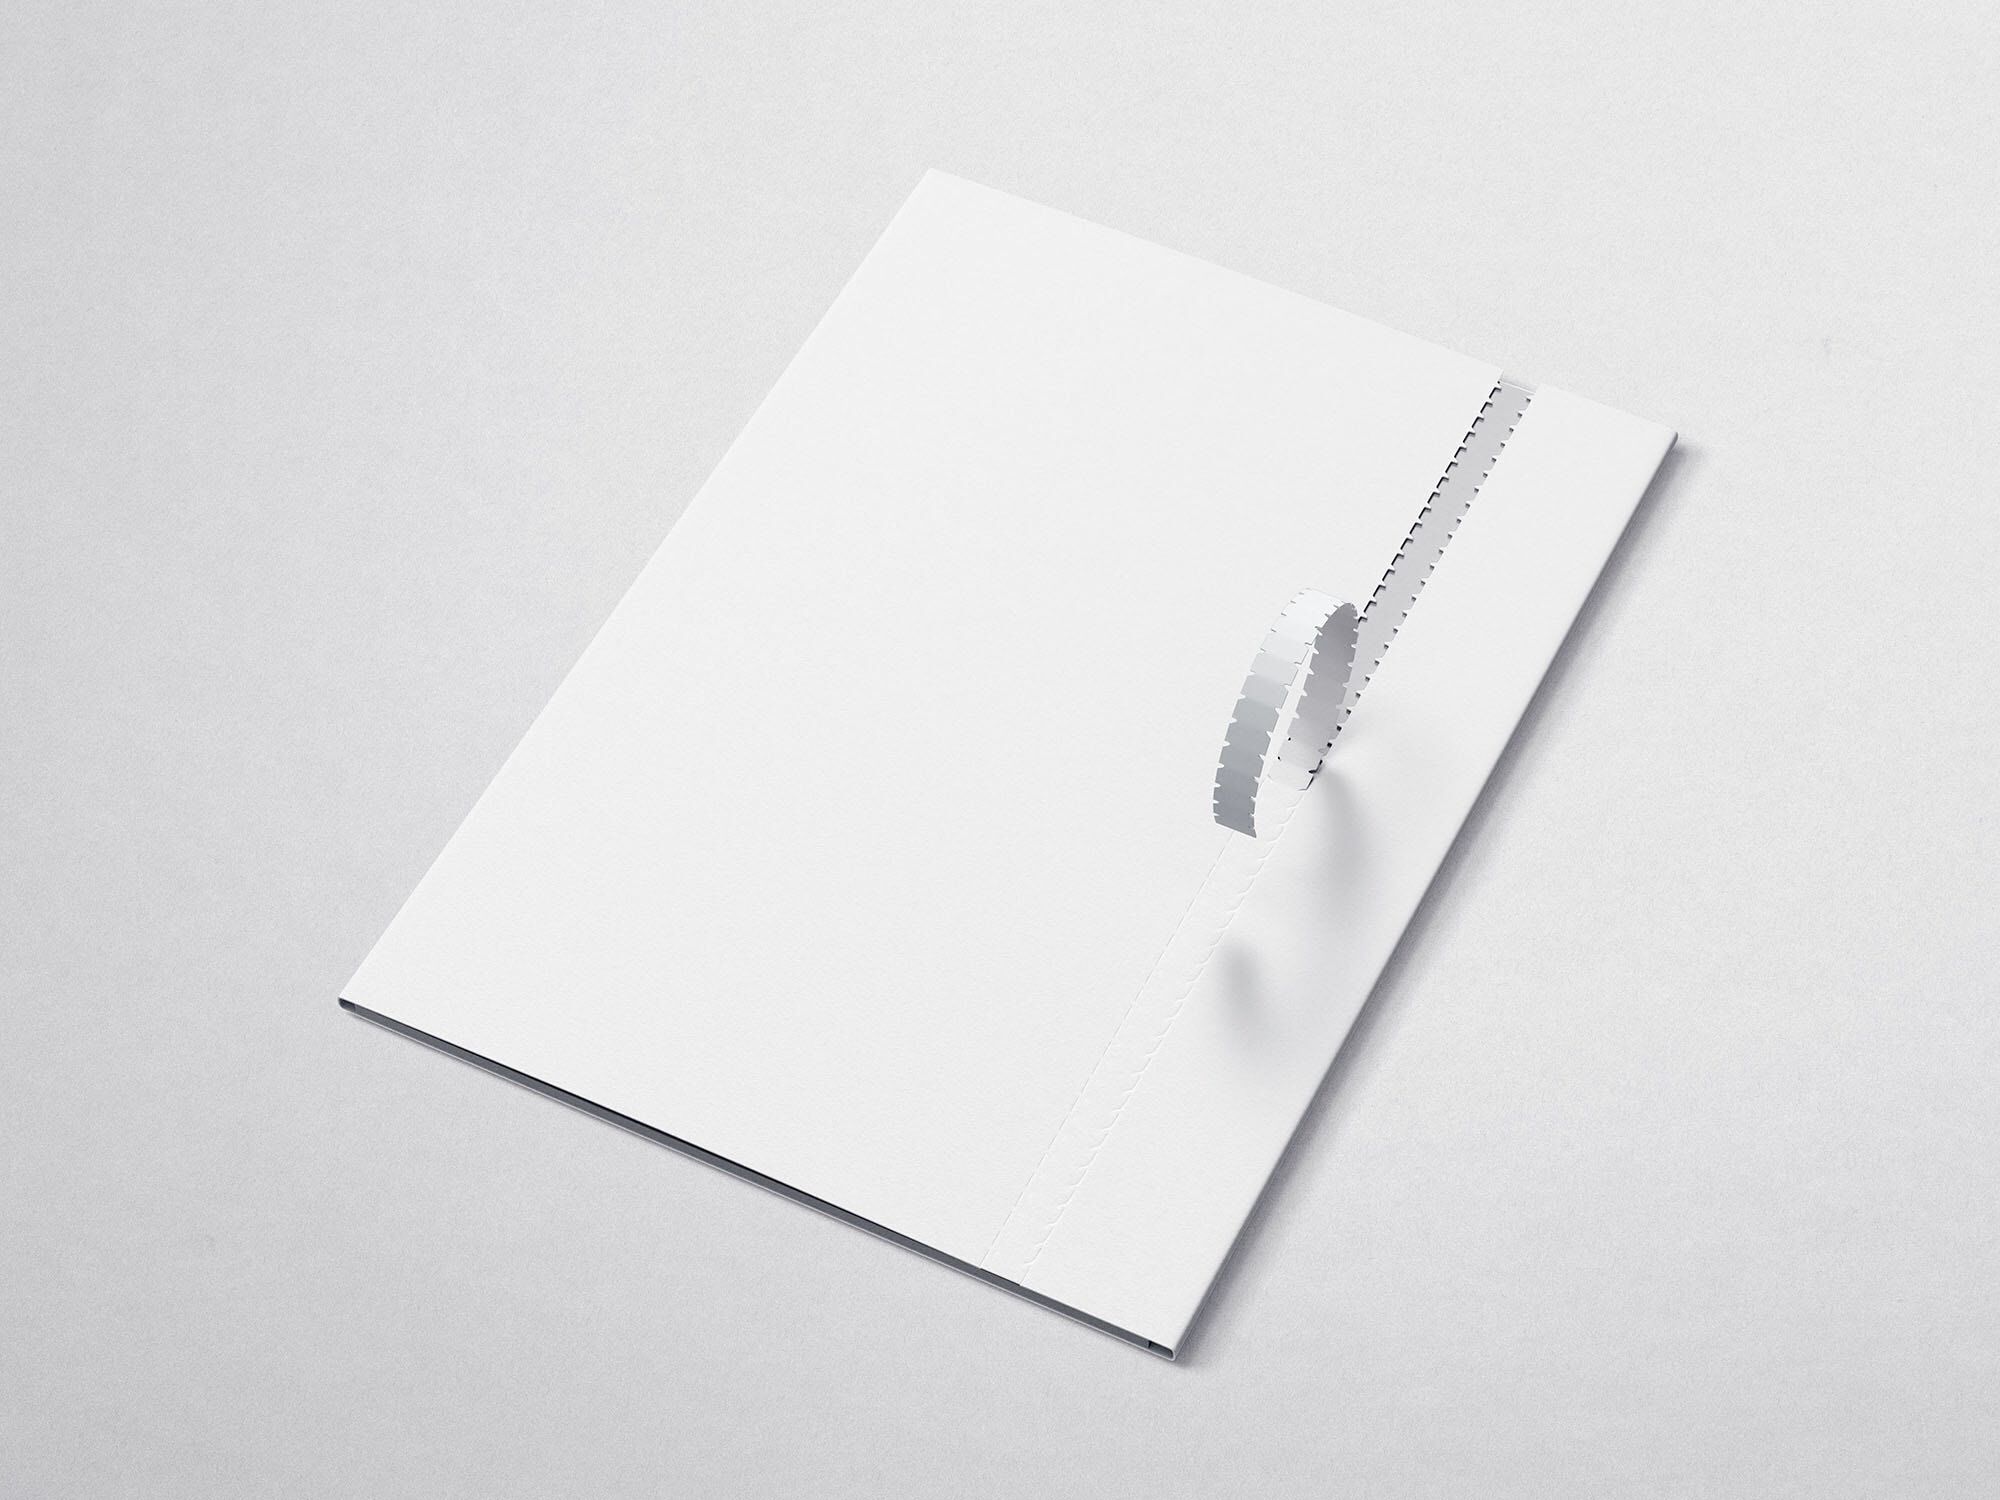 Paper Folder with a Perforation Mockup FREE PSD